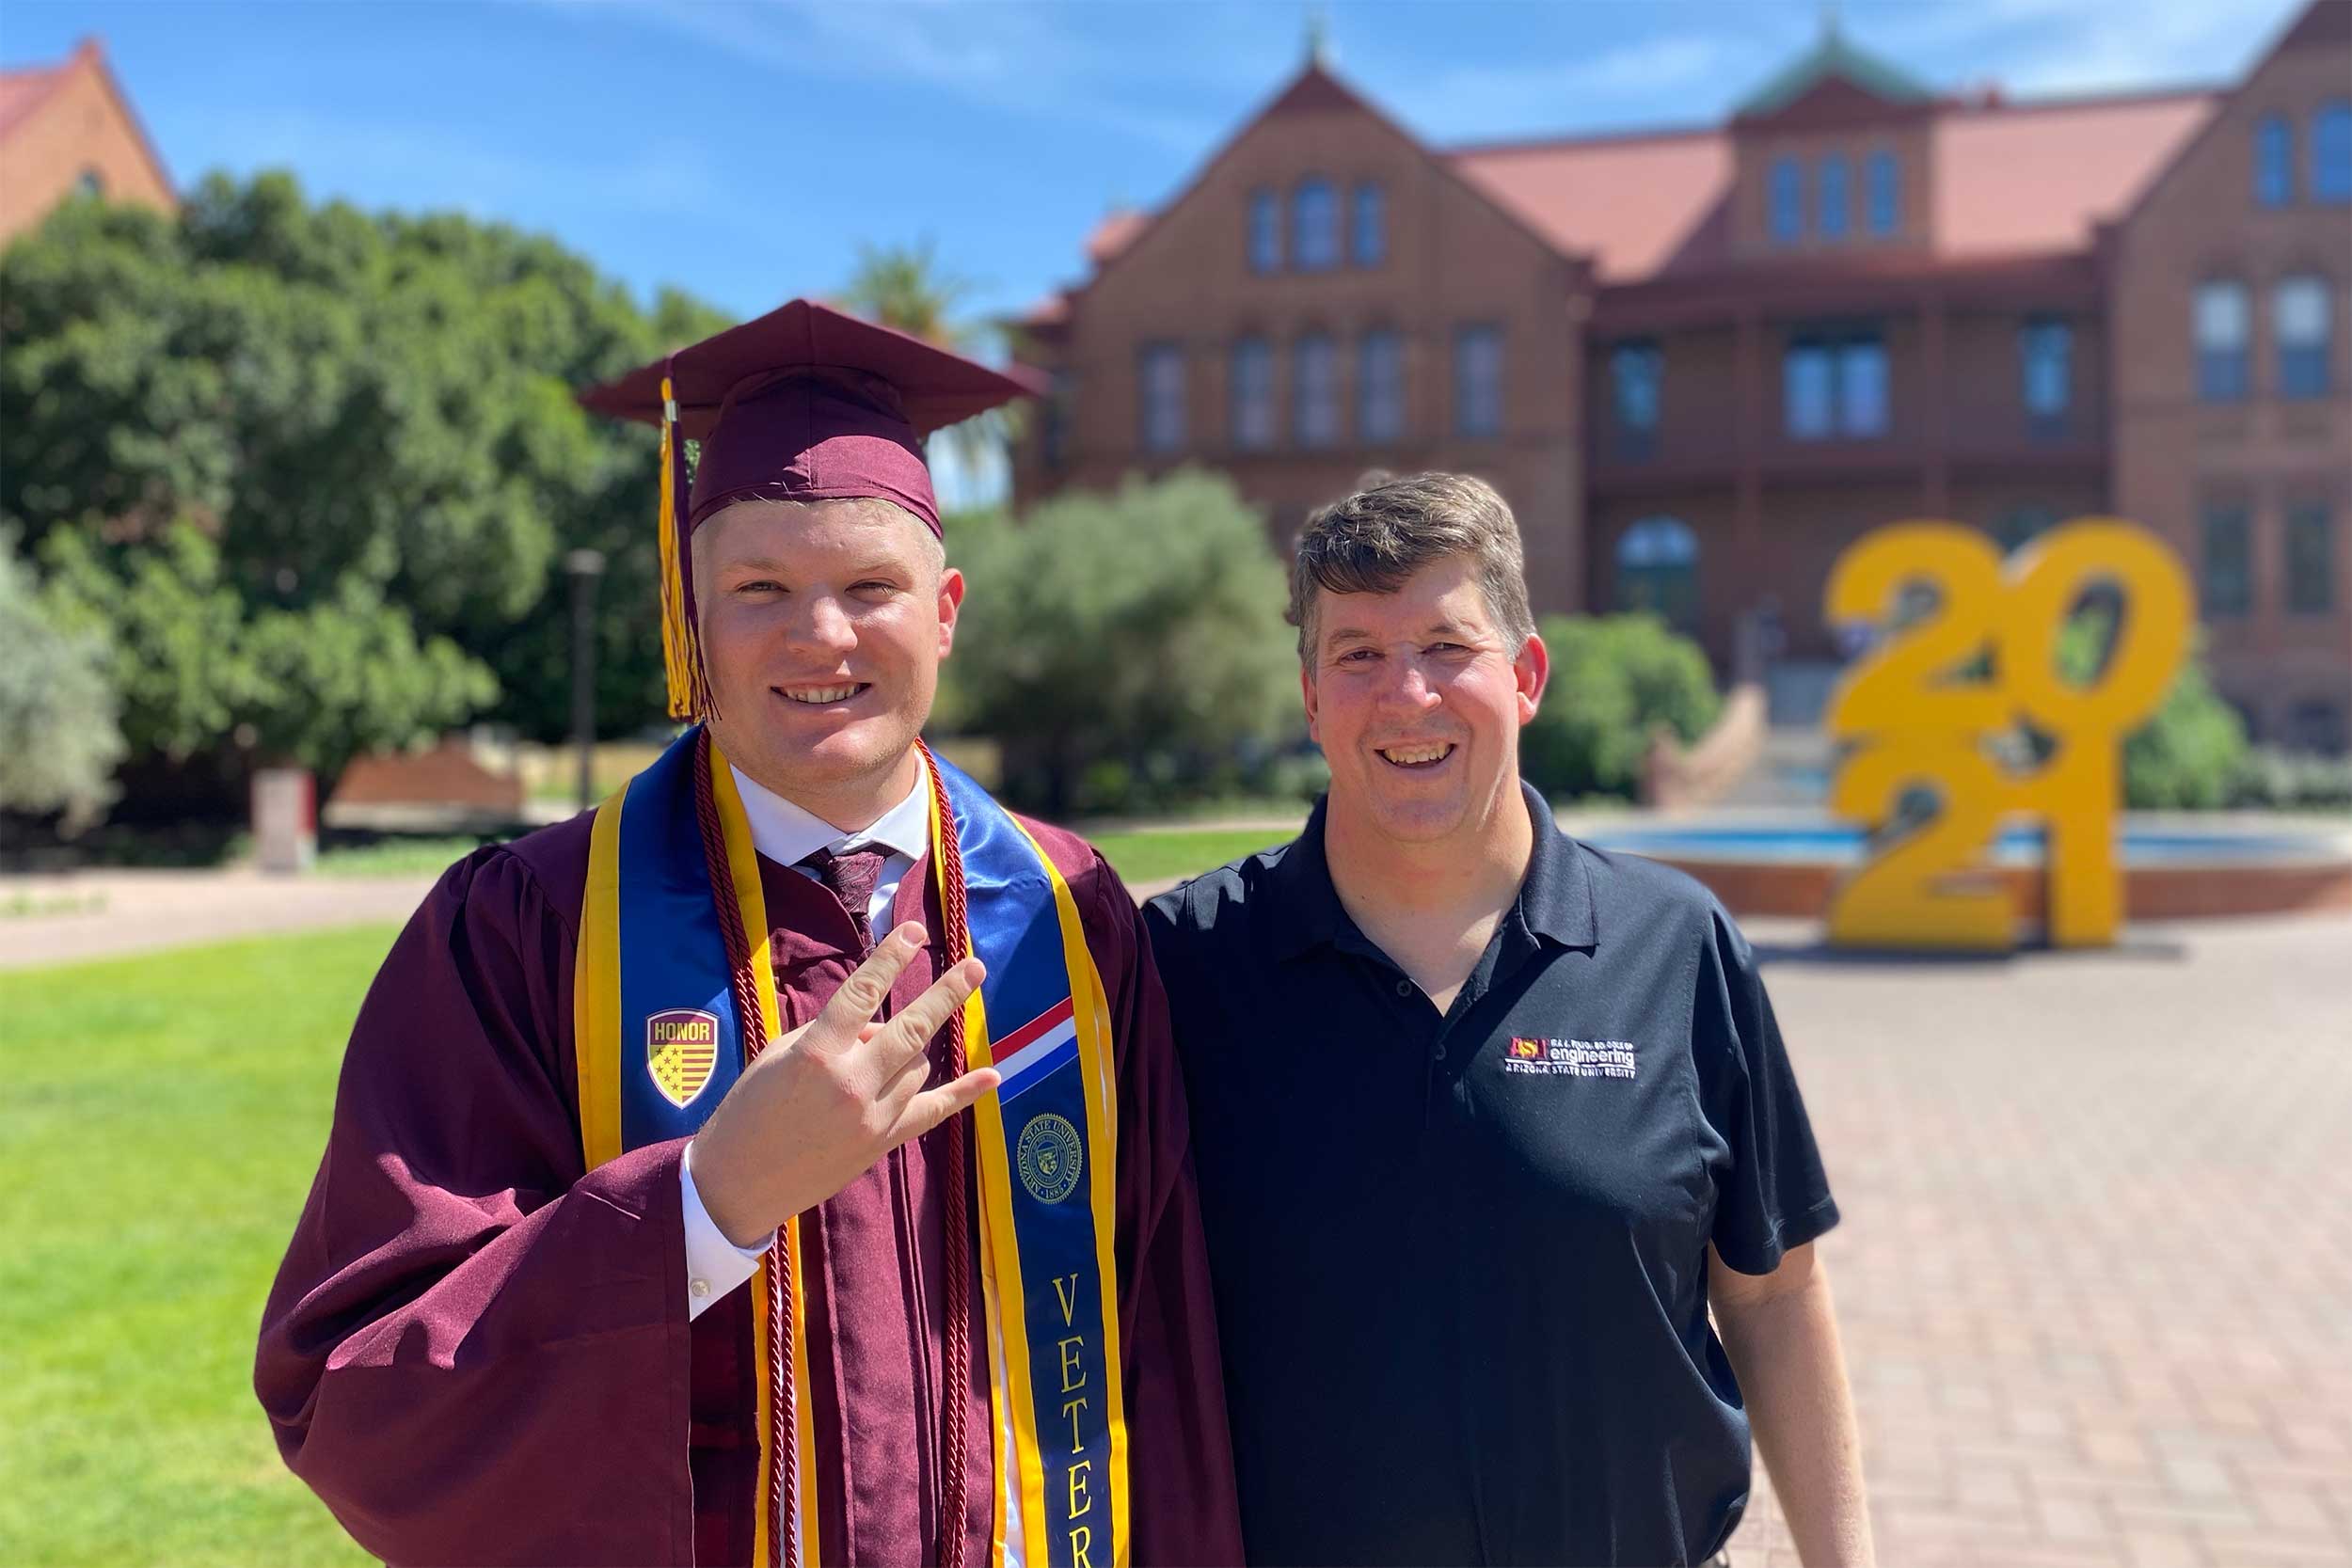 Fulton Schools Graduate Bobby Hudson, in his full regalia, including his veteran's stole, stands with his father, Rick, a Fulton Schools alumnus, in front of Old Main on ASU's Tempe campus